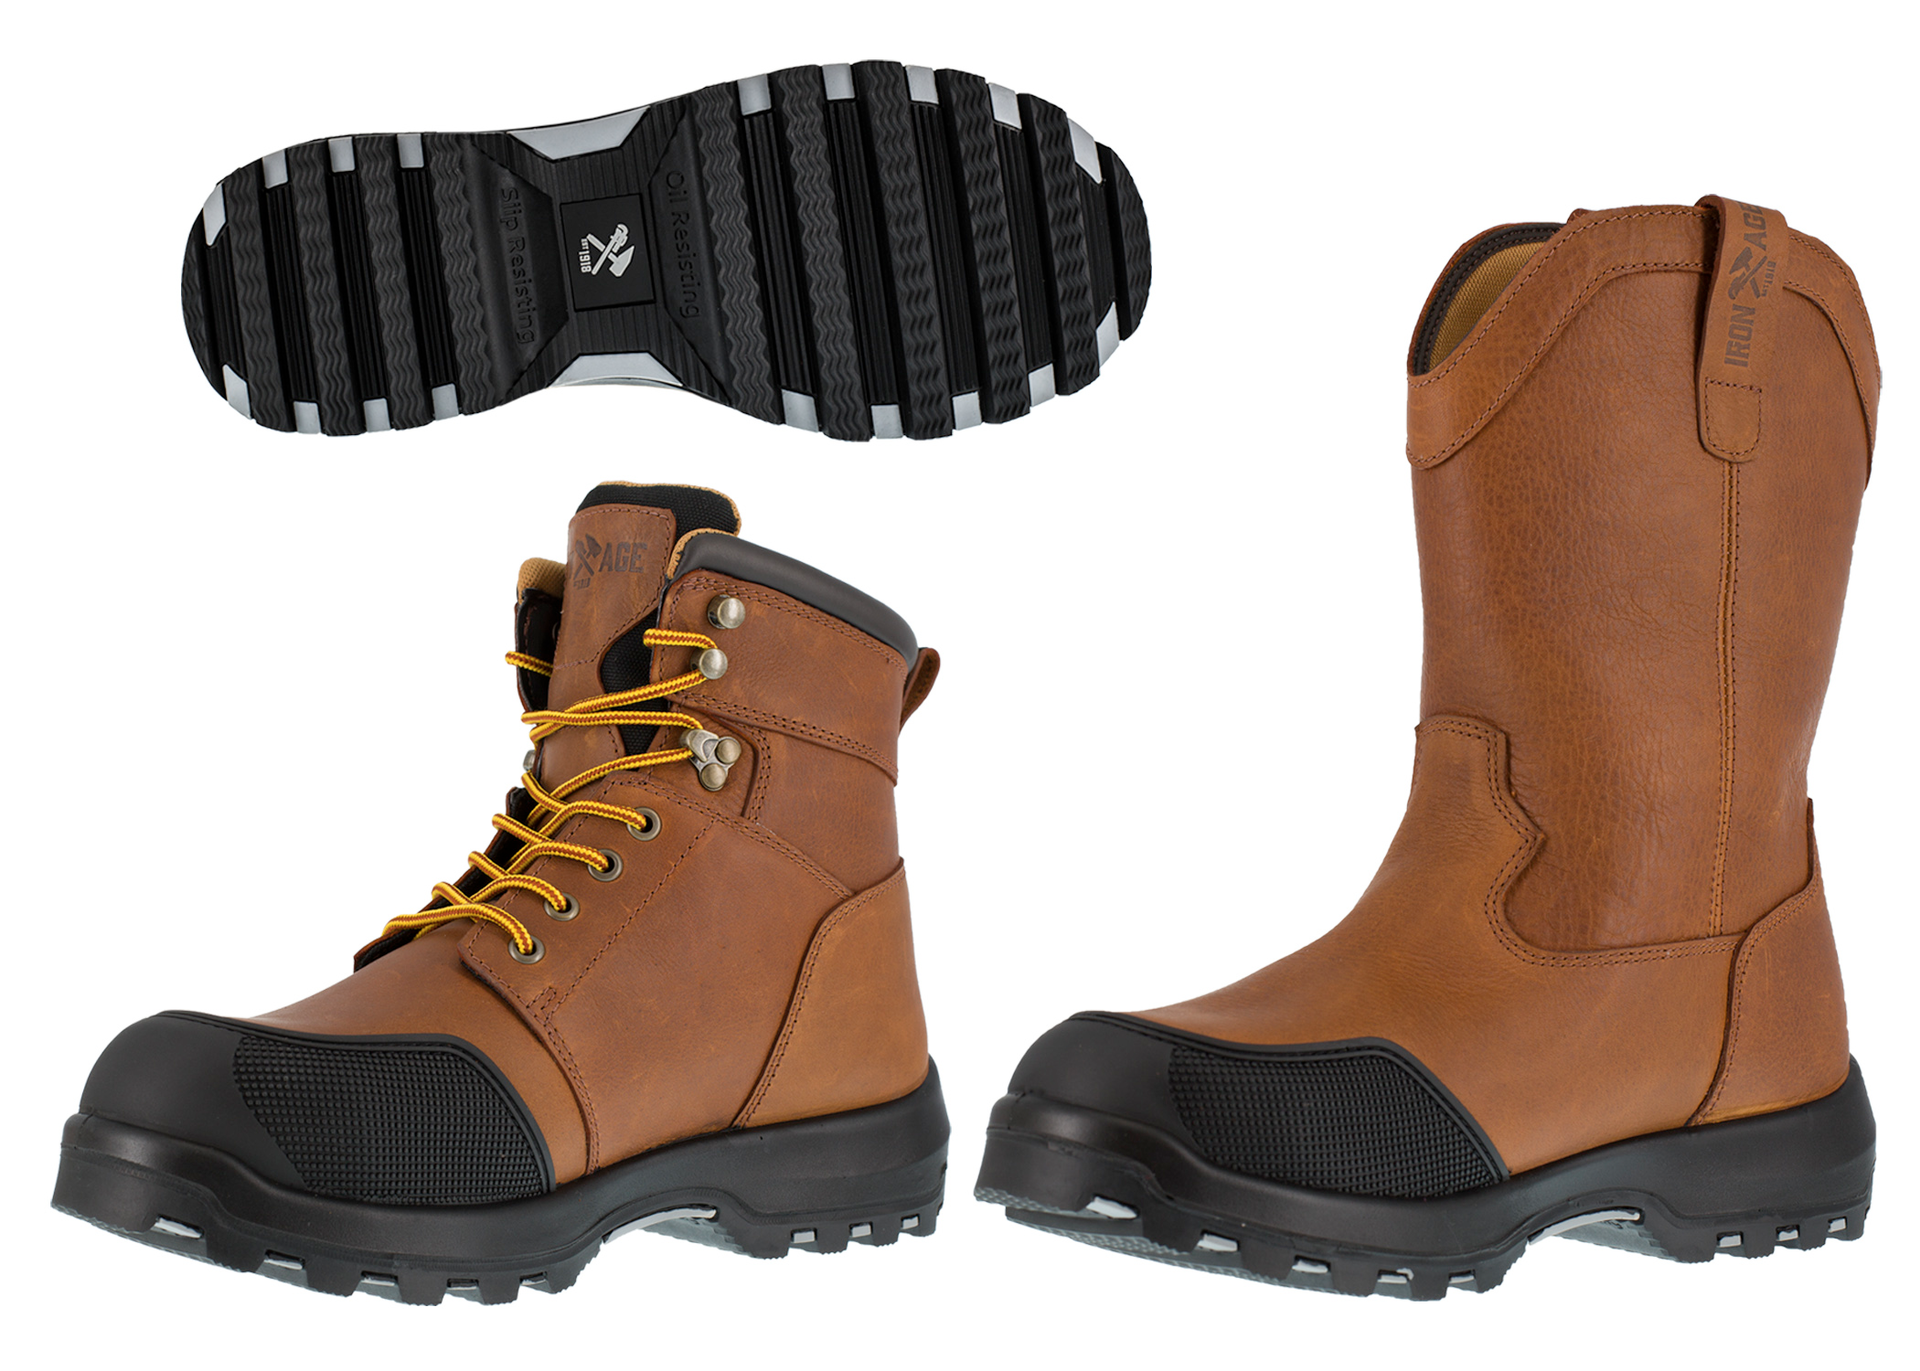 Iron Age Footwear Introduces First 